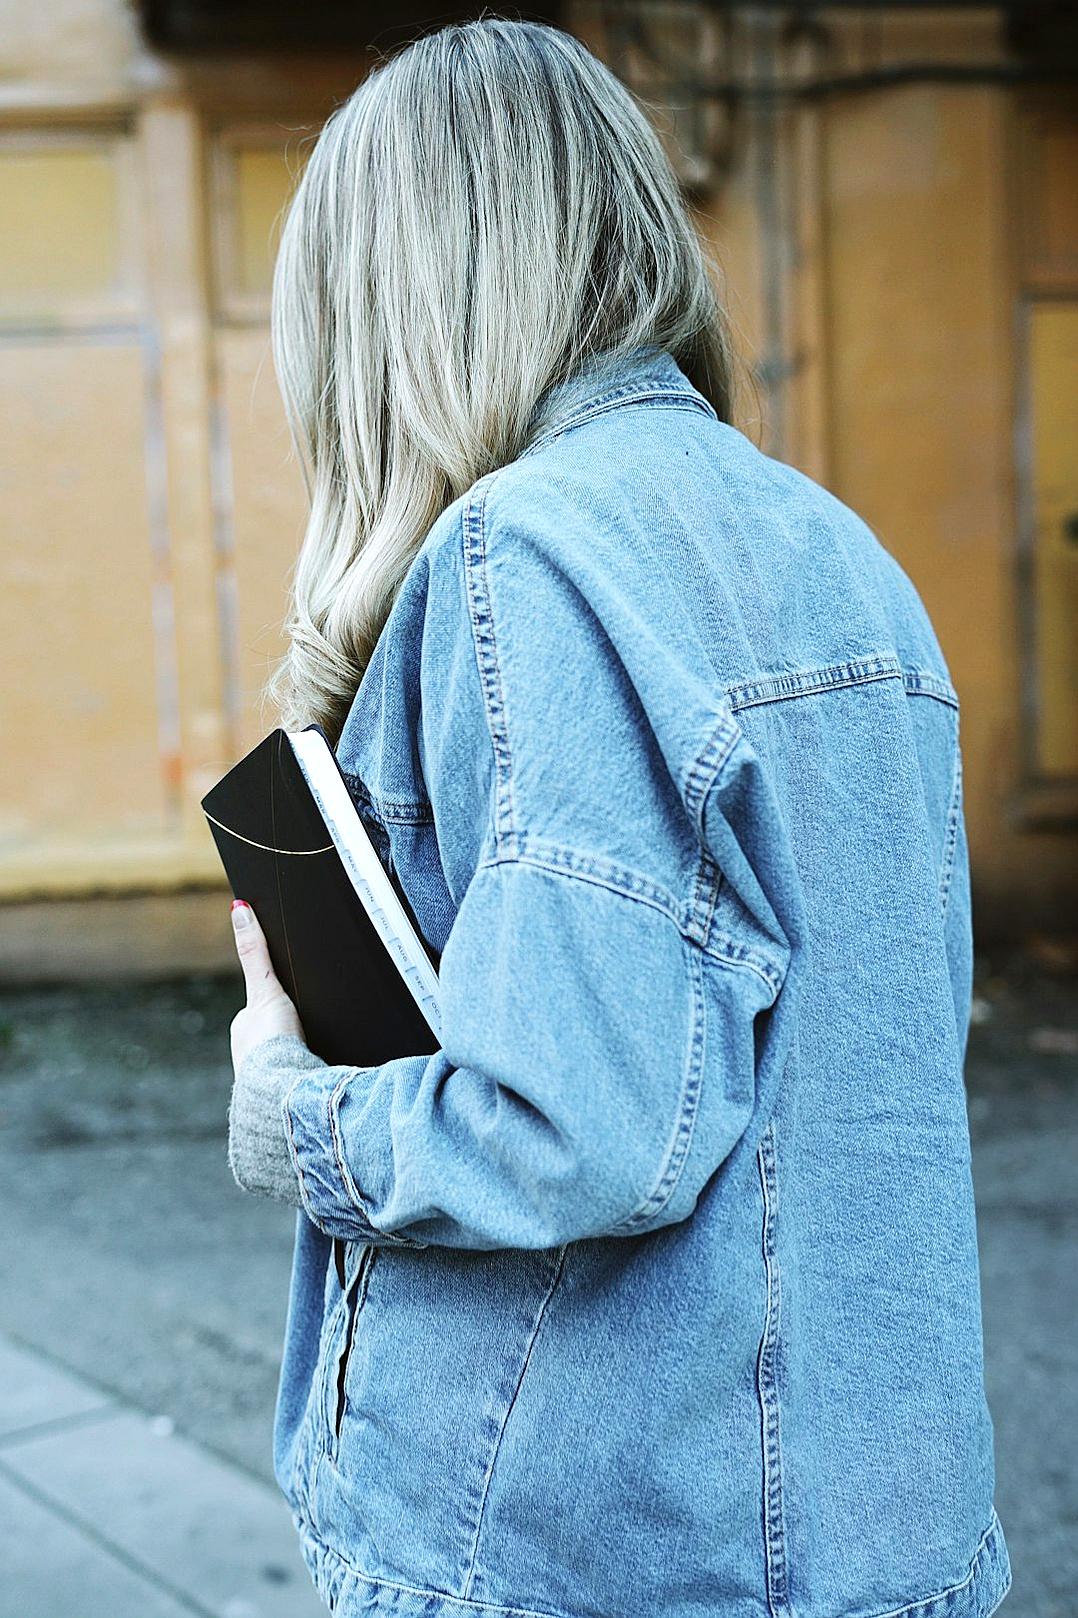 A woman with shoulder-length blonde hair, wearing an oversized denim jacket and jeans, holding a black book in her hand. She is seen from the back as she walks down the street, looking over her right shoulder at something off frame. The photo captures a casual yet stylish urban look, showcasing both fashion and what is clearly visible on the books. Her posture reflects confidence while maintaining a relaxed vibe, complementing to create a full-body portrait in the style of an urban photographer.